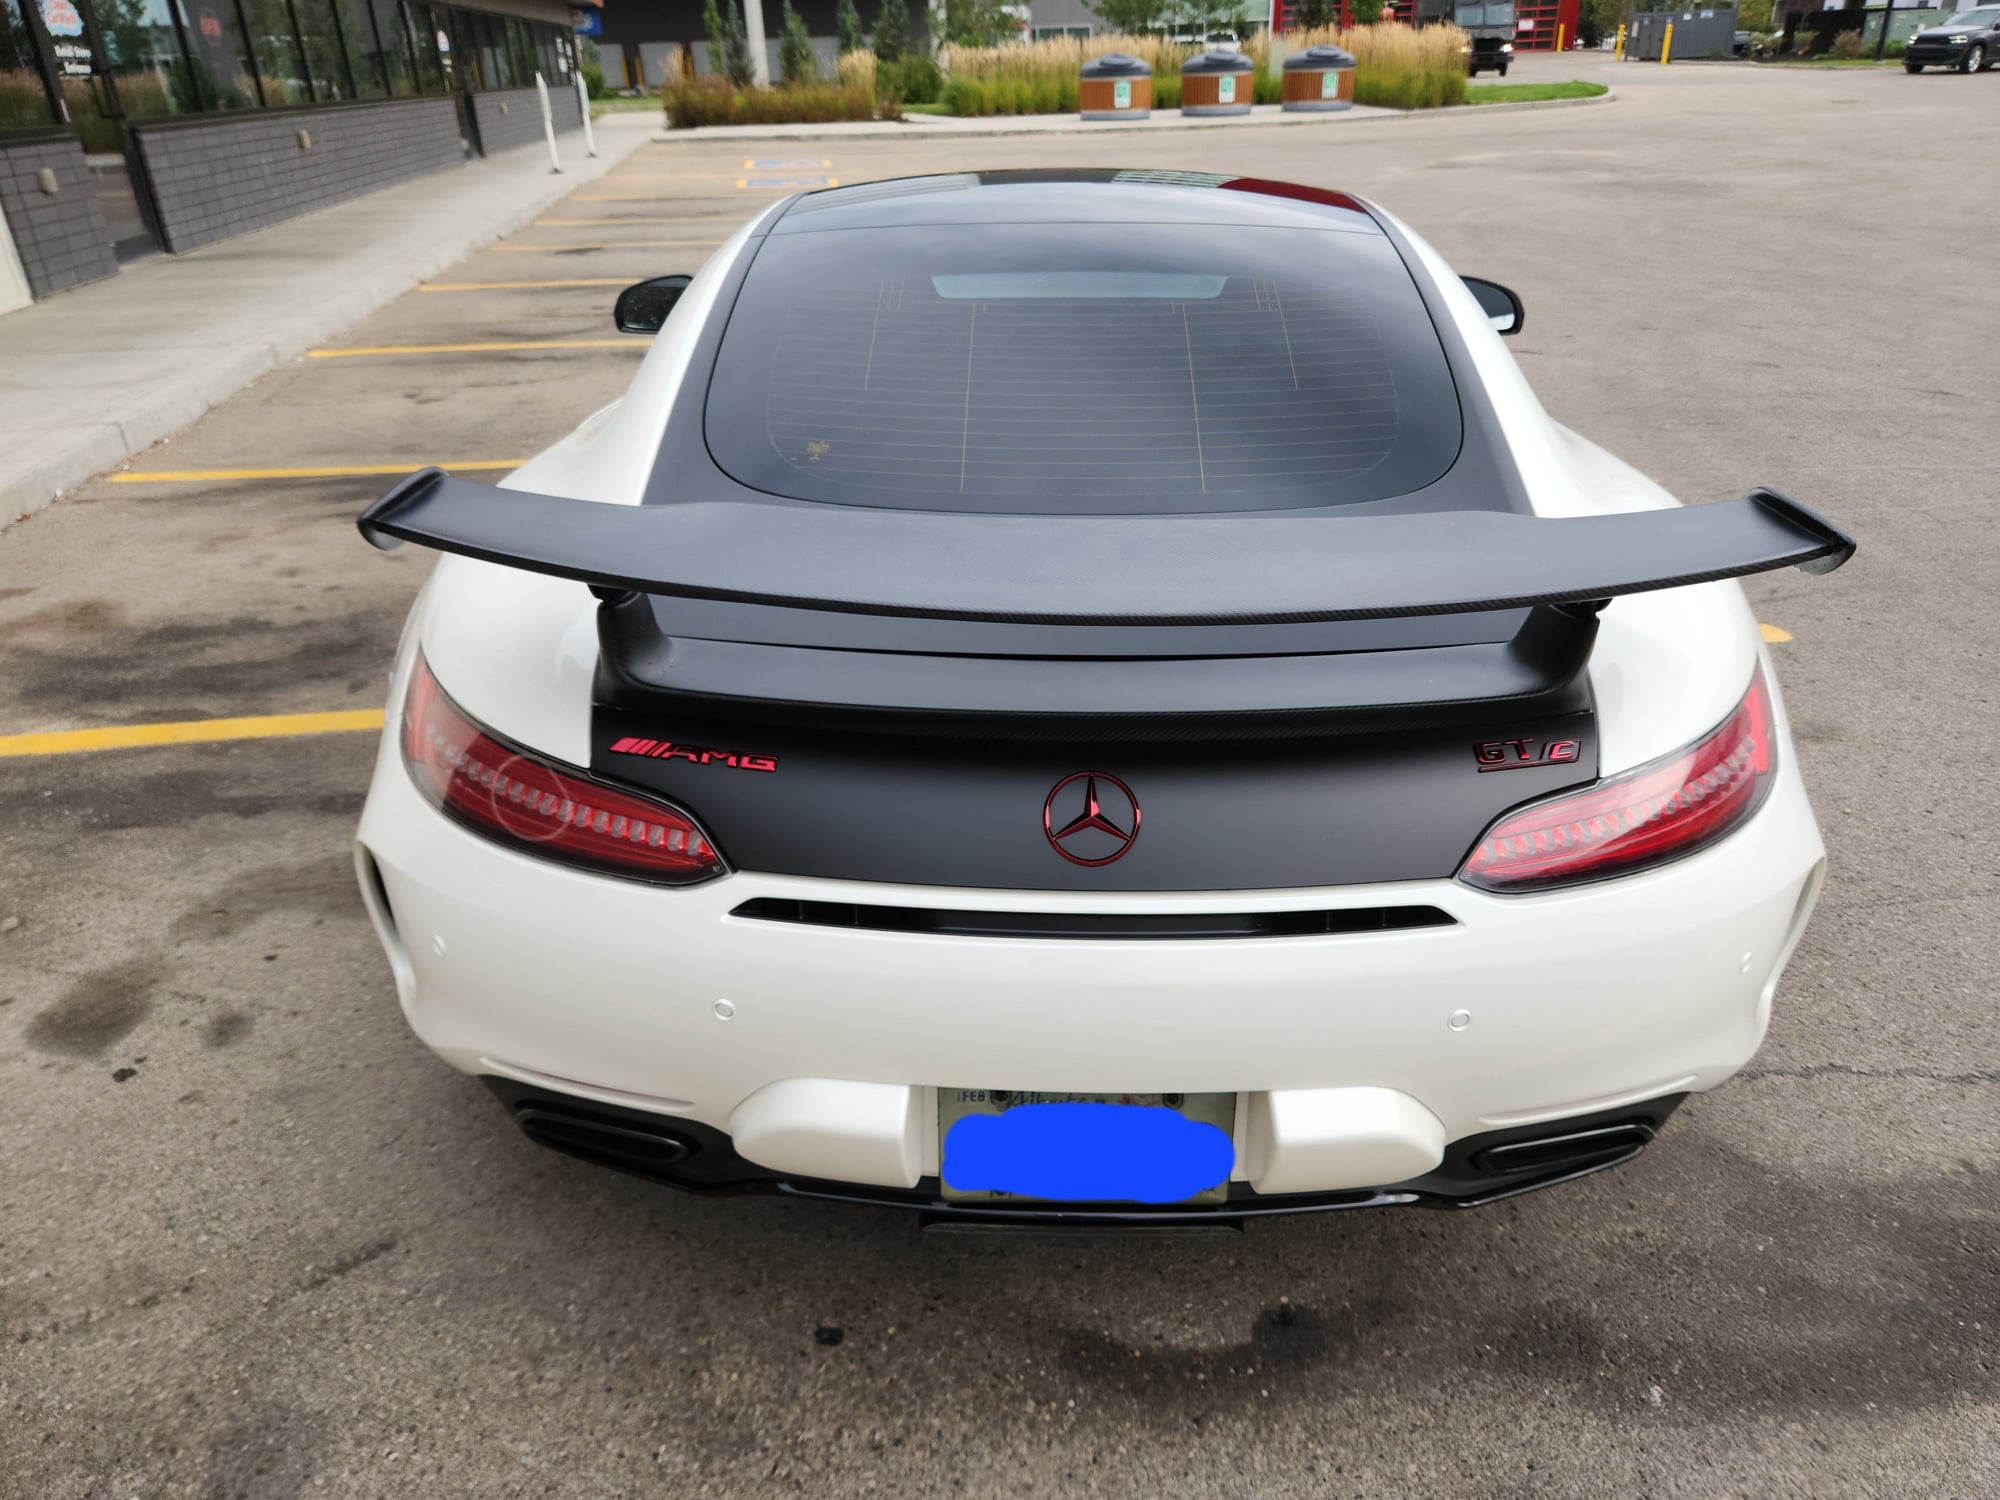 Exterior Body Parts - CMST Tuning Carbon Fiber Rear Spoiler Wing Ver.1 for Mercedes Benz C190 AMG GT GTS GT - Used - 2015 to 2021 Mercedes-Benz AMG GT S - 2018 to 2021 Mercedes-Benz AMG GT R - 2018 to 2021 Mercedes-Benz AMG GT R - Edmonton, AB T6W 4J, Canada